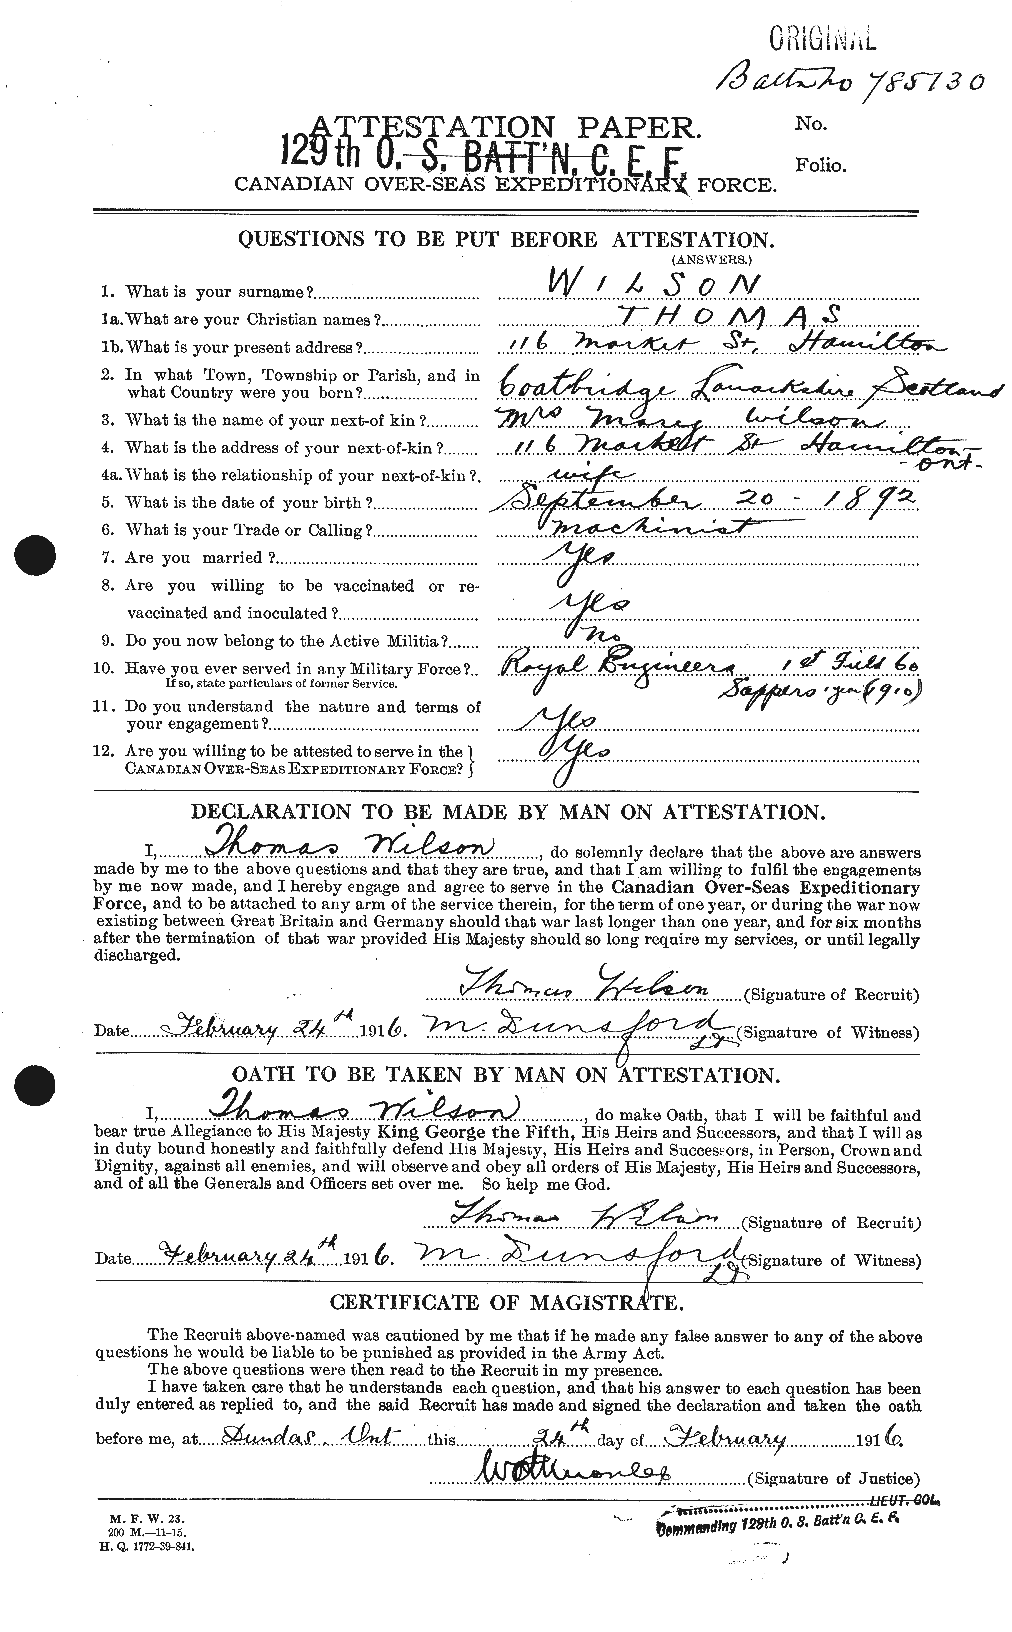 Personnel Records of the First World War - CEF 681190a